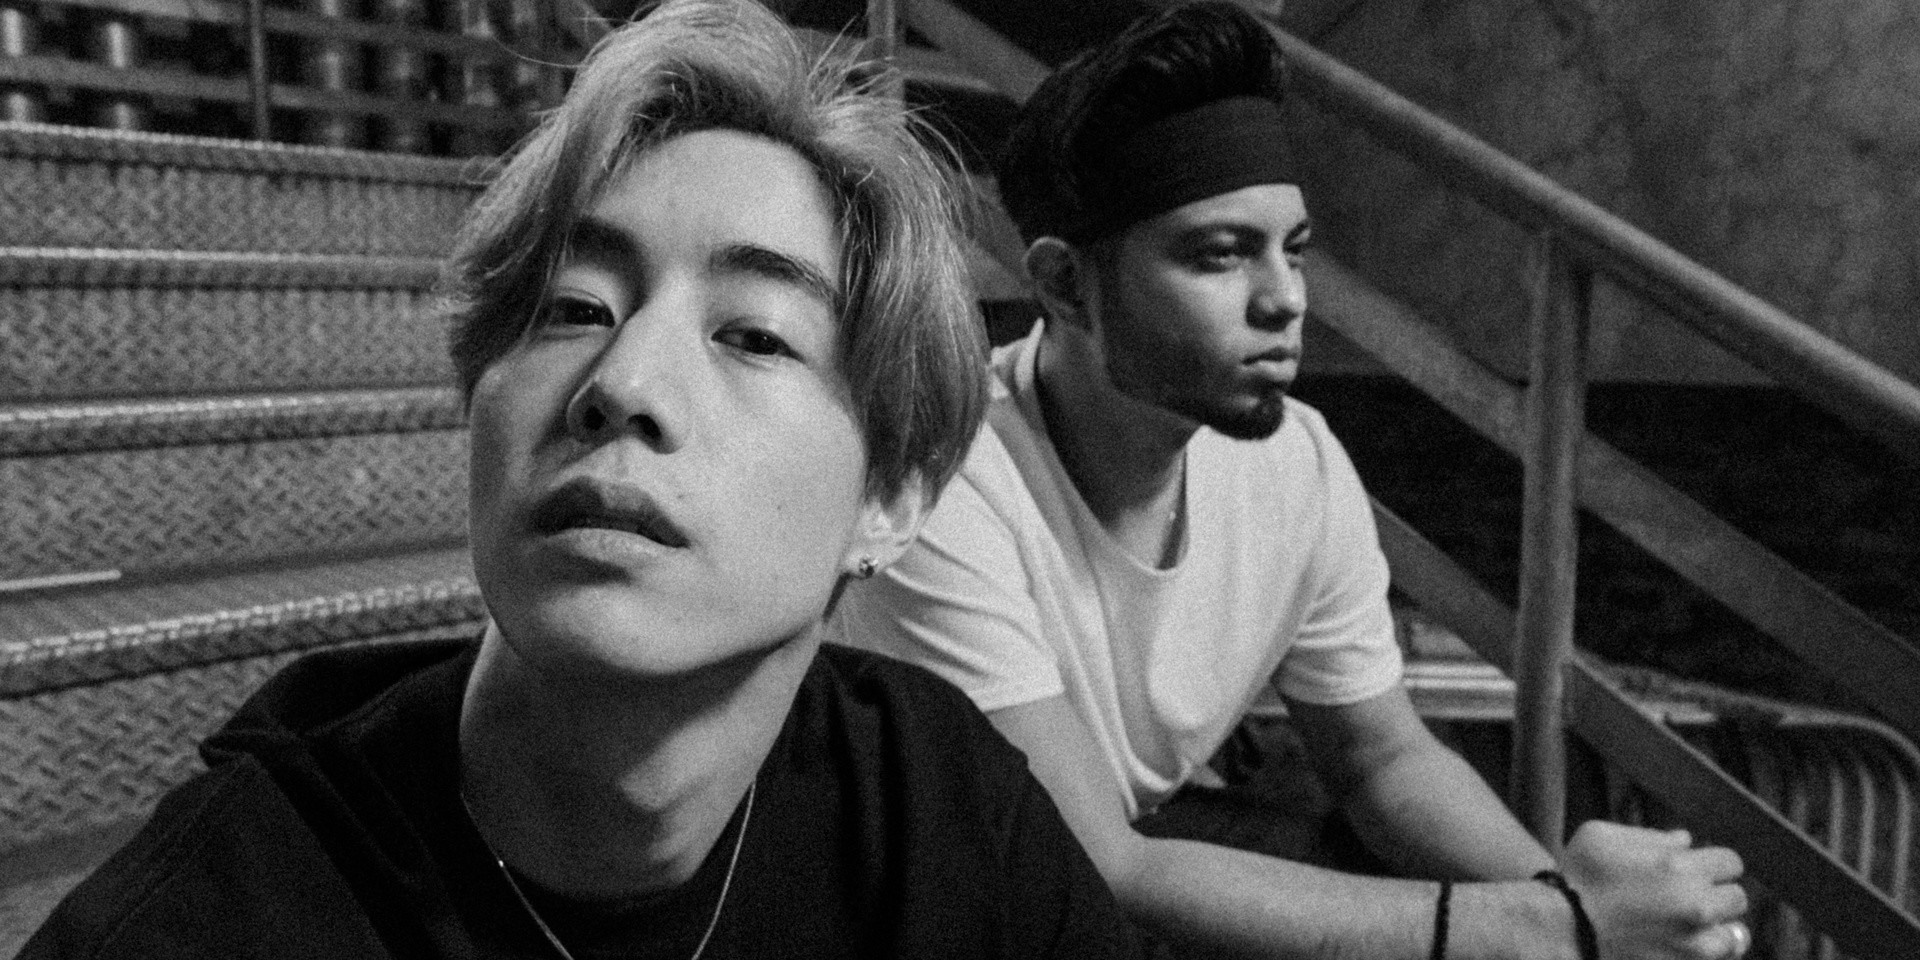 GOT7's Mark Tuan and Sanjoy on their collaborative track 'One In A Million': "This is just the beginning."